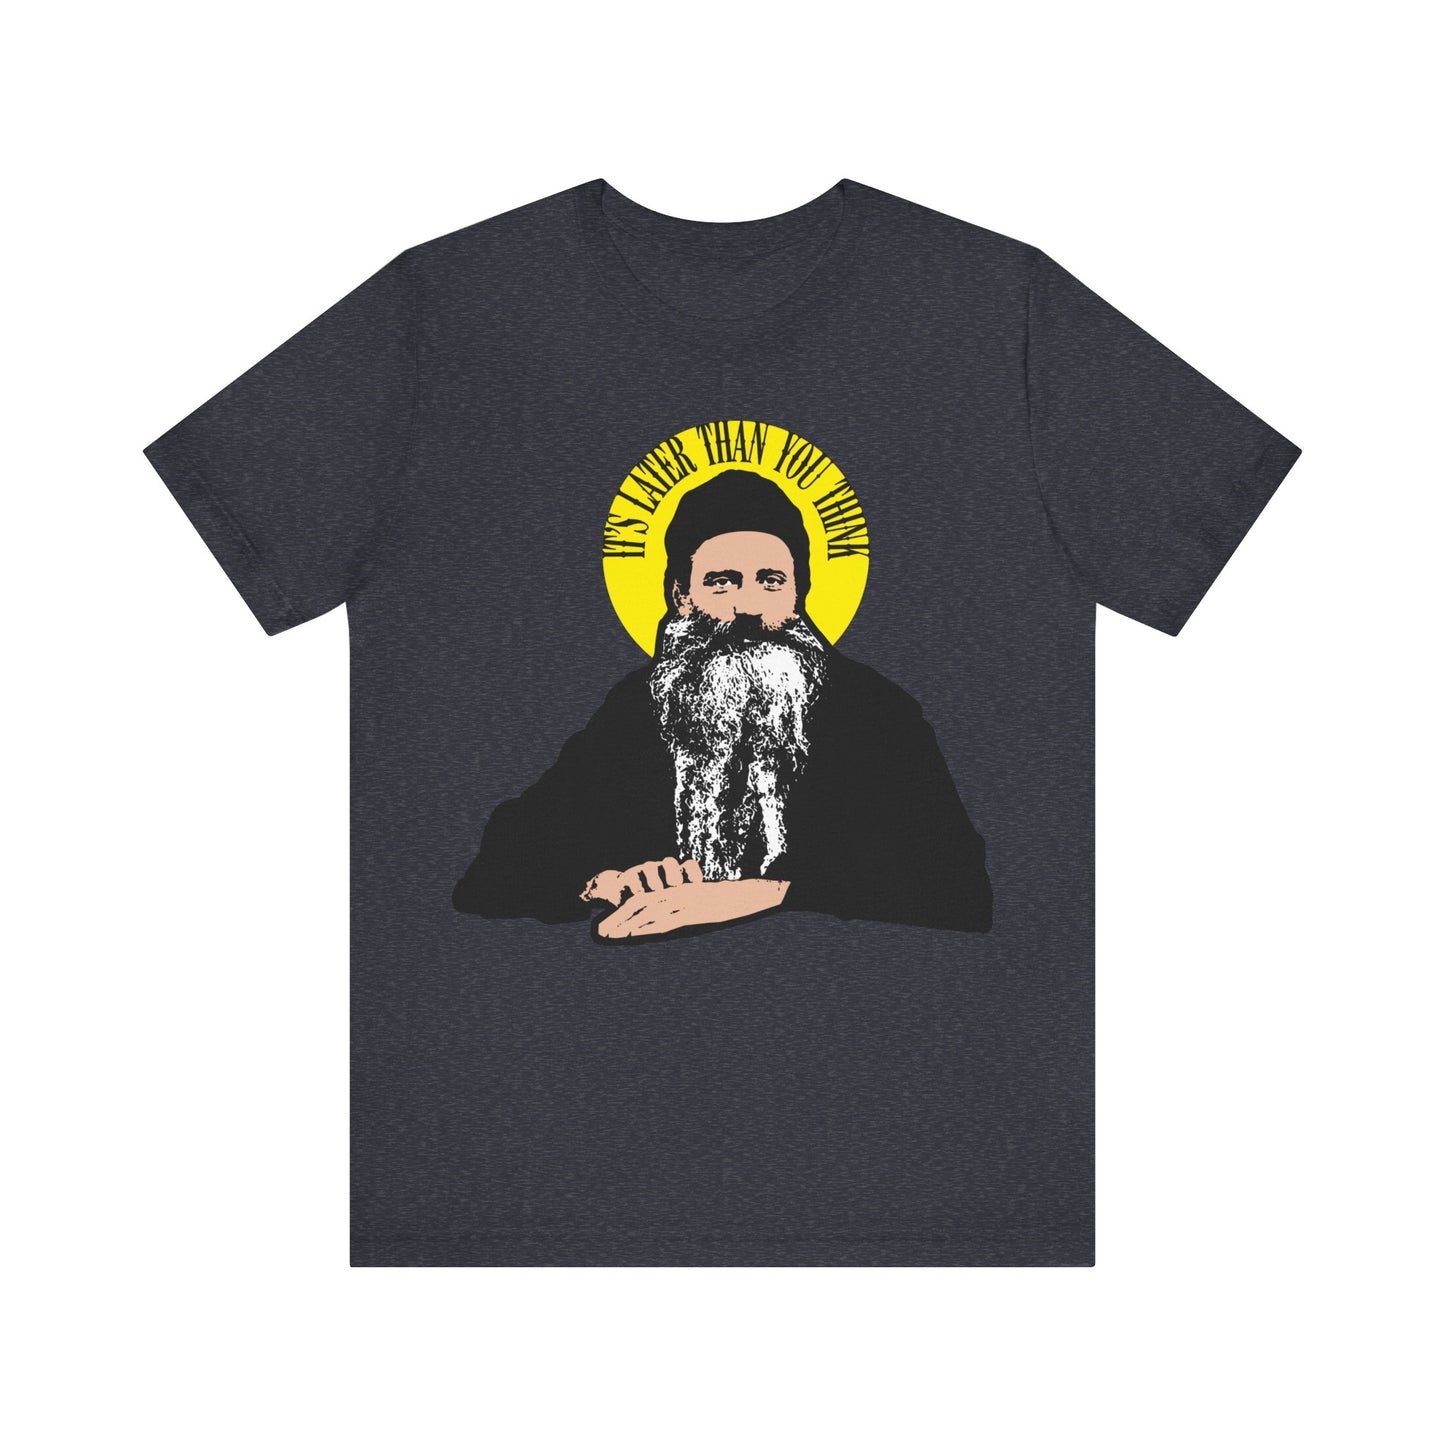 It's Later Than You Think No. 5 | Fr Seraphim Rose | Orthodox Christian T-Shirt